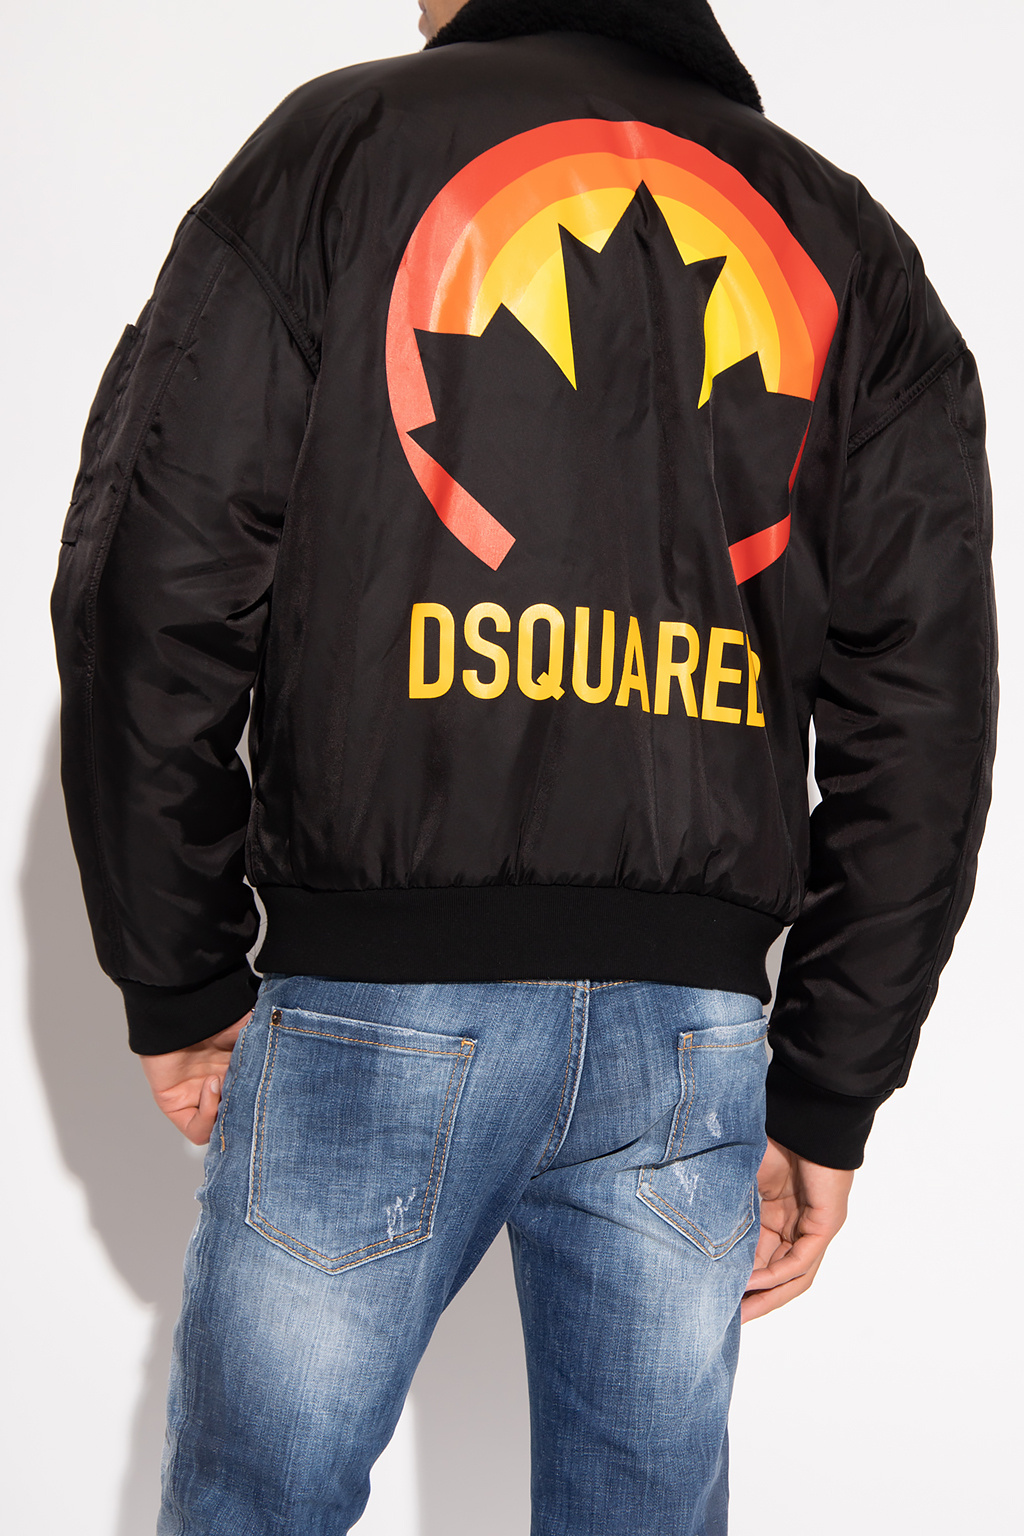 Dsquared2 Insulated W1772tt1 jacket with logo